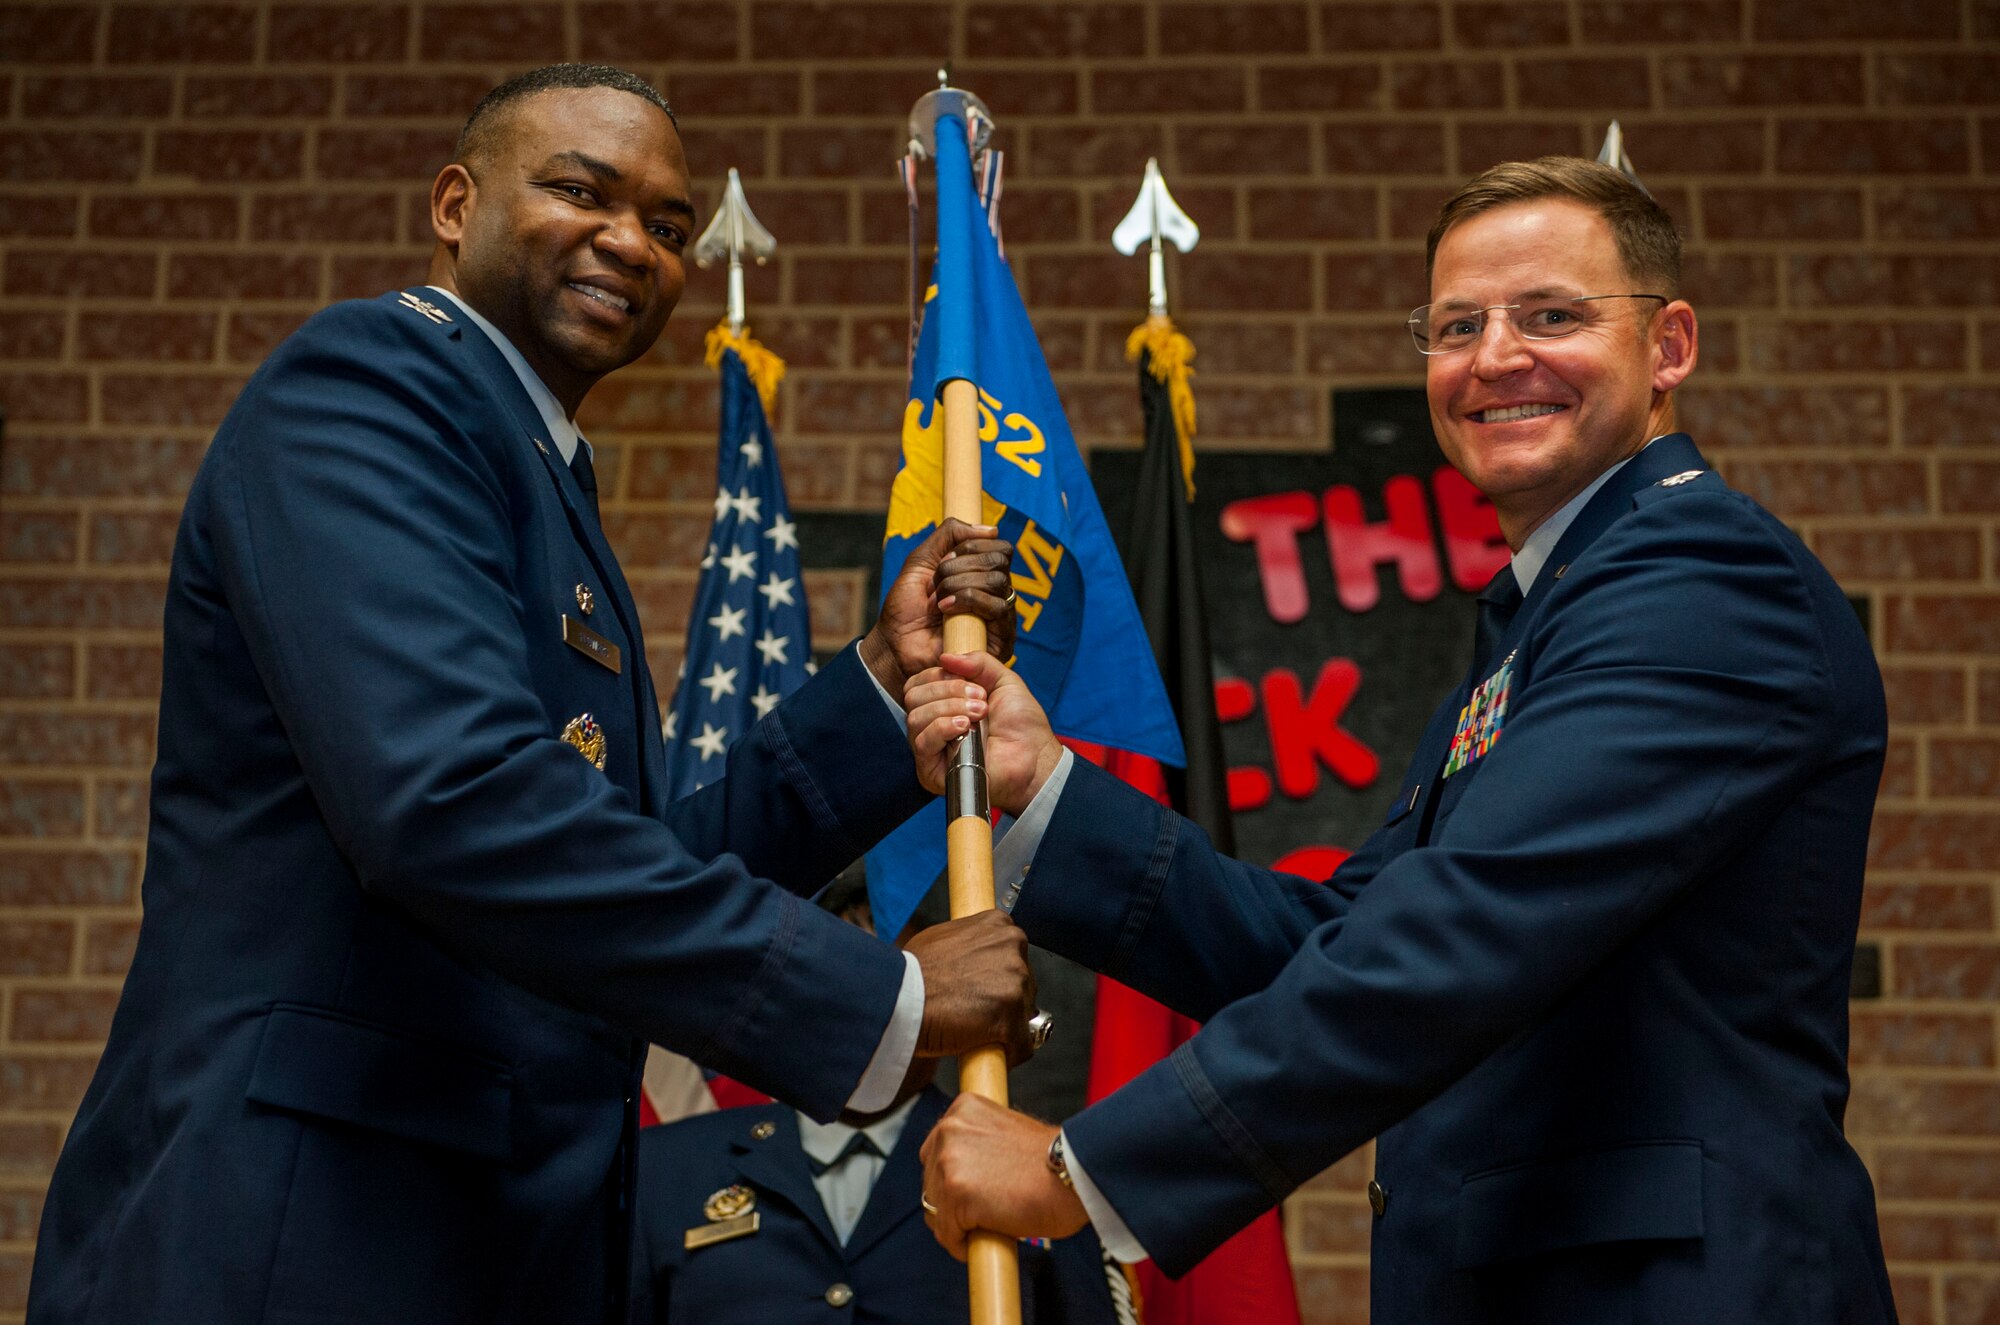 U.S. Air Force Col. Alfred Flowers, 52nd Medical Group commander, left, gives the ceremonial guidon to U.S. Air Force Lt. Col. Thomas Lesnick, incoming 52nd Medical Support Squadron commander, during the 52nd MDSS change of command ceremony in the Brickhouse on Spangdahlem Air Base, Germany, June 30, 2016. Lesnick assumed command from U.S. Air Force Lt. Col. Wade Adair, outgoing 52nd MDSS commander, under the overseeing authority of Flowers and formally greeted his new squadron for the first time during the ceremony. (U.S. Air Force photo by Airman 1st Class Timothy Kim/Released)